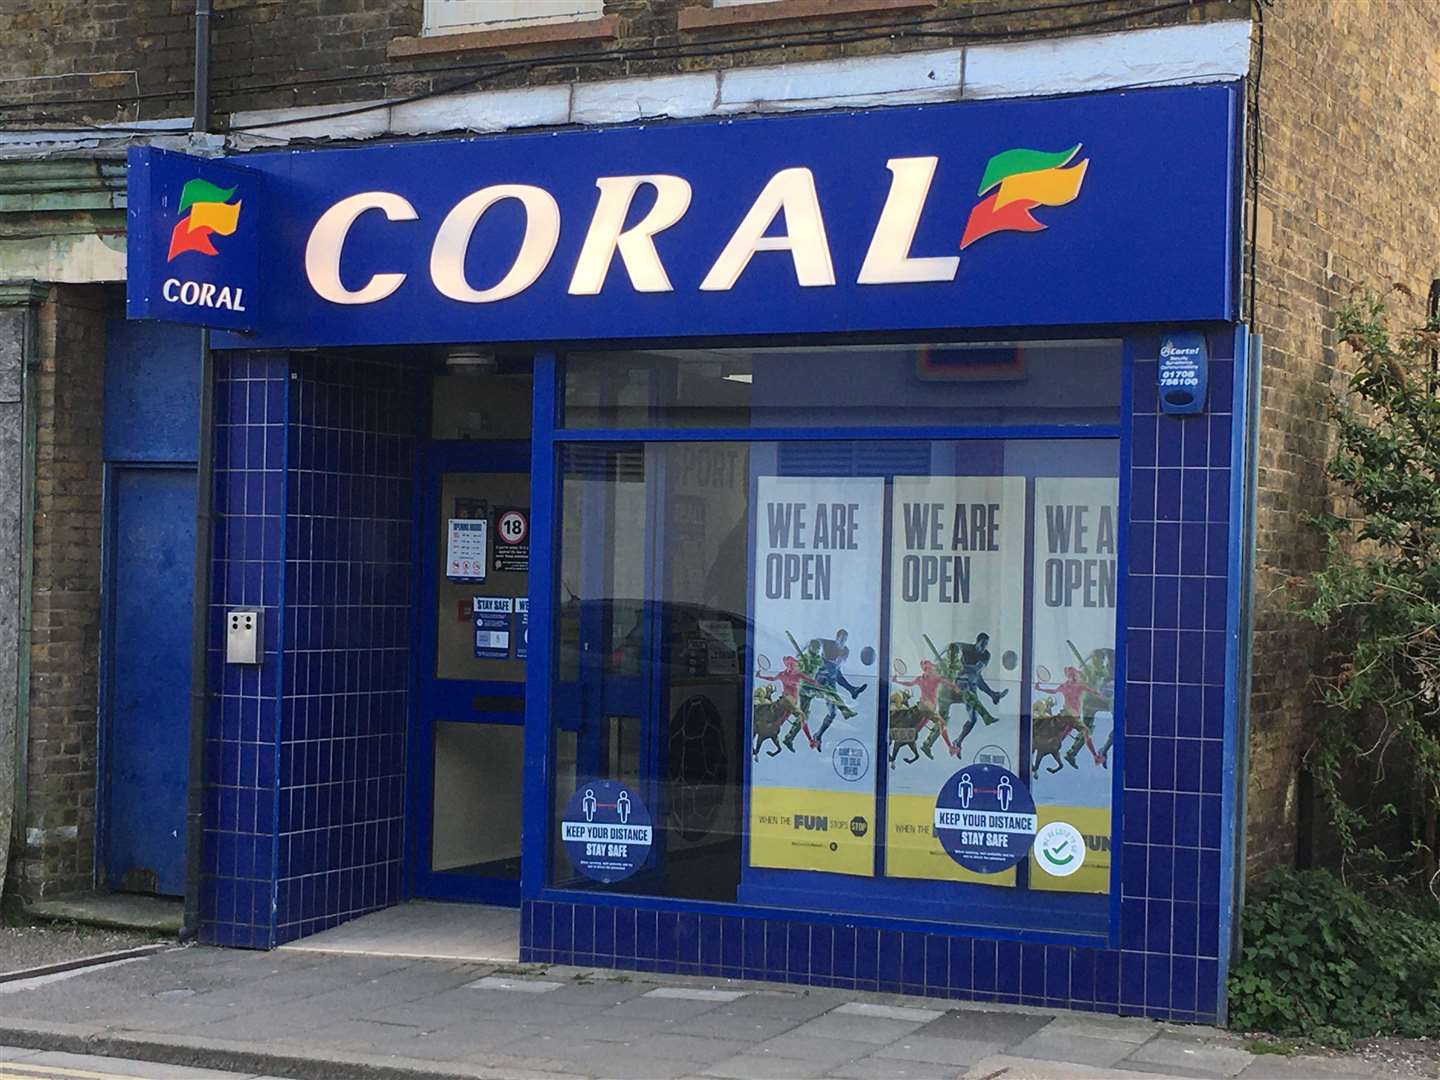 Coral bookmakers in East Street Sittingbourne where Dale's bike was stolen